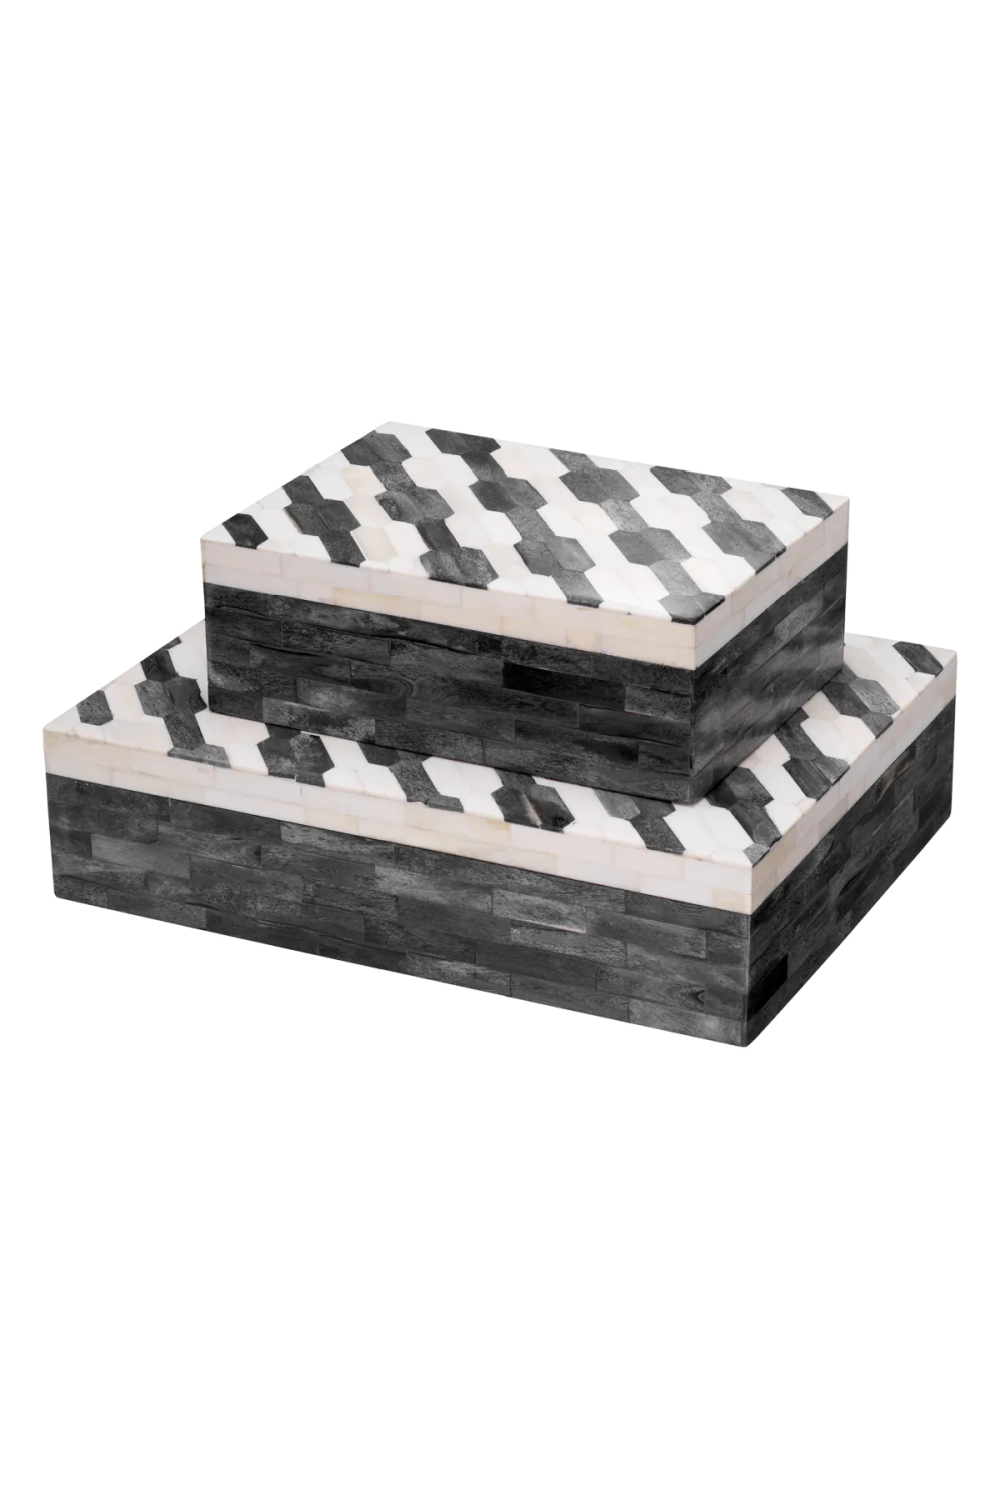 Gray Patterned Box | Eichholtz Rodeo | Oroa.com